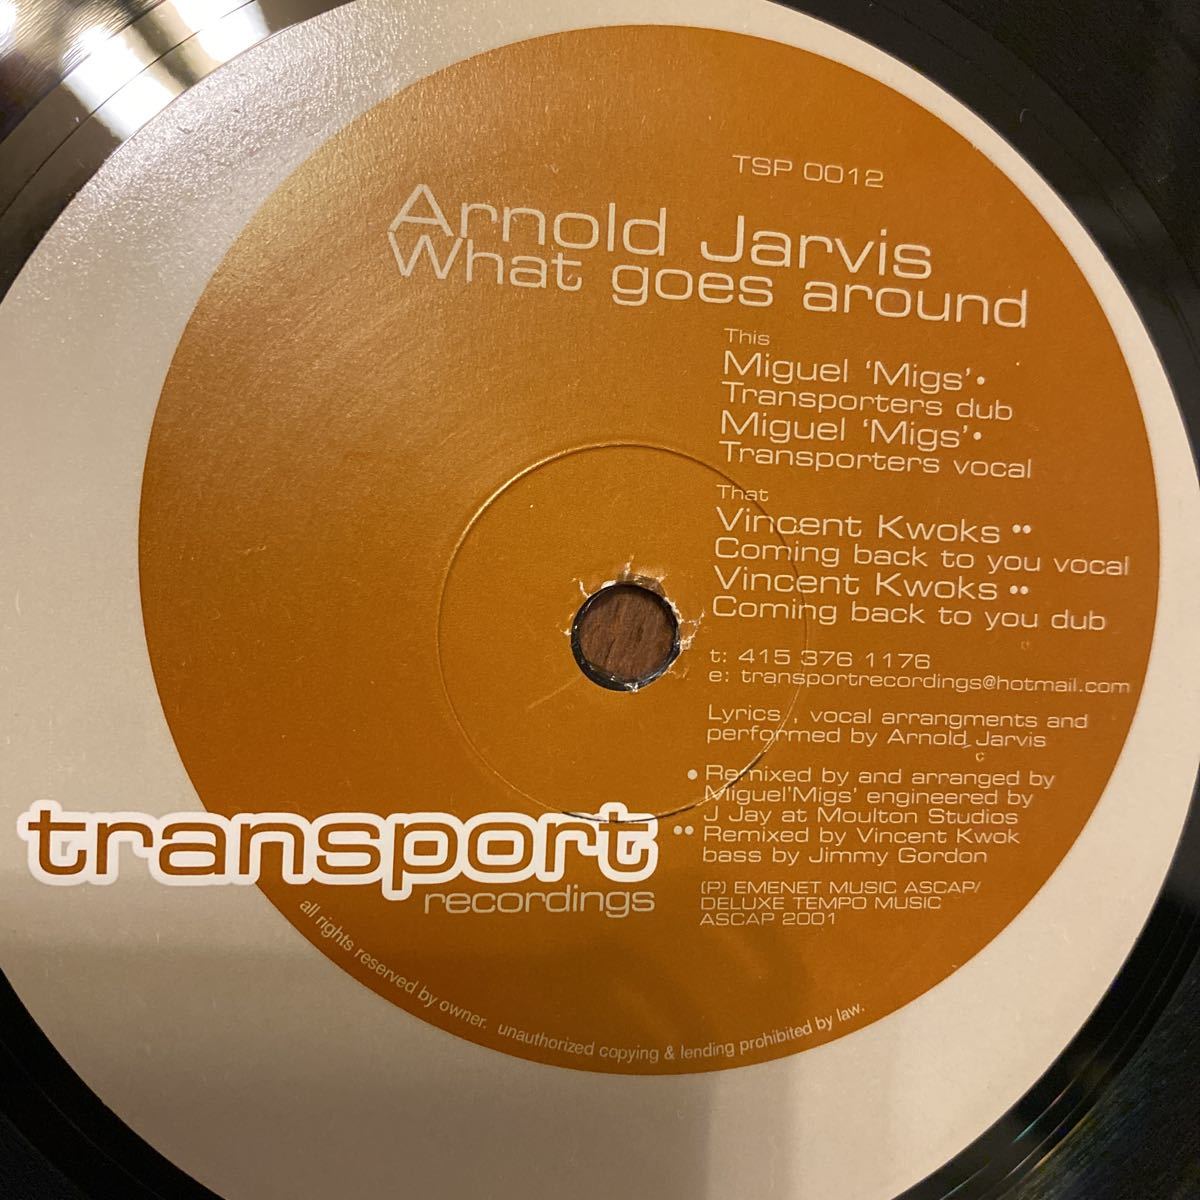 transport recordings presents Arnold Jarvis / What goes around Miguel Migs Vincent Kwok 12インチ レコード houseの画像2